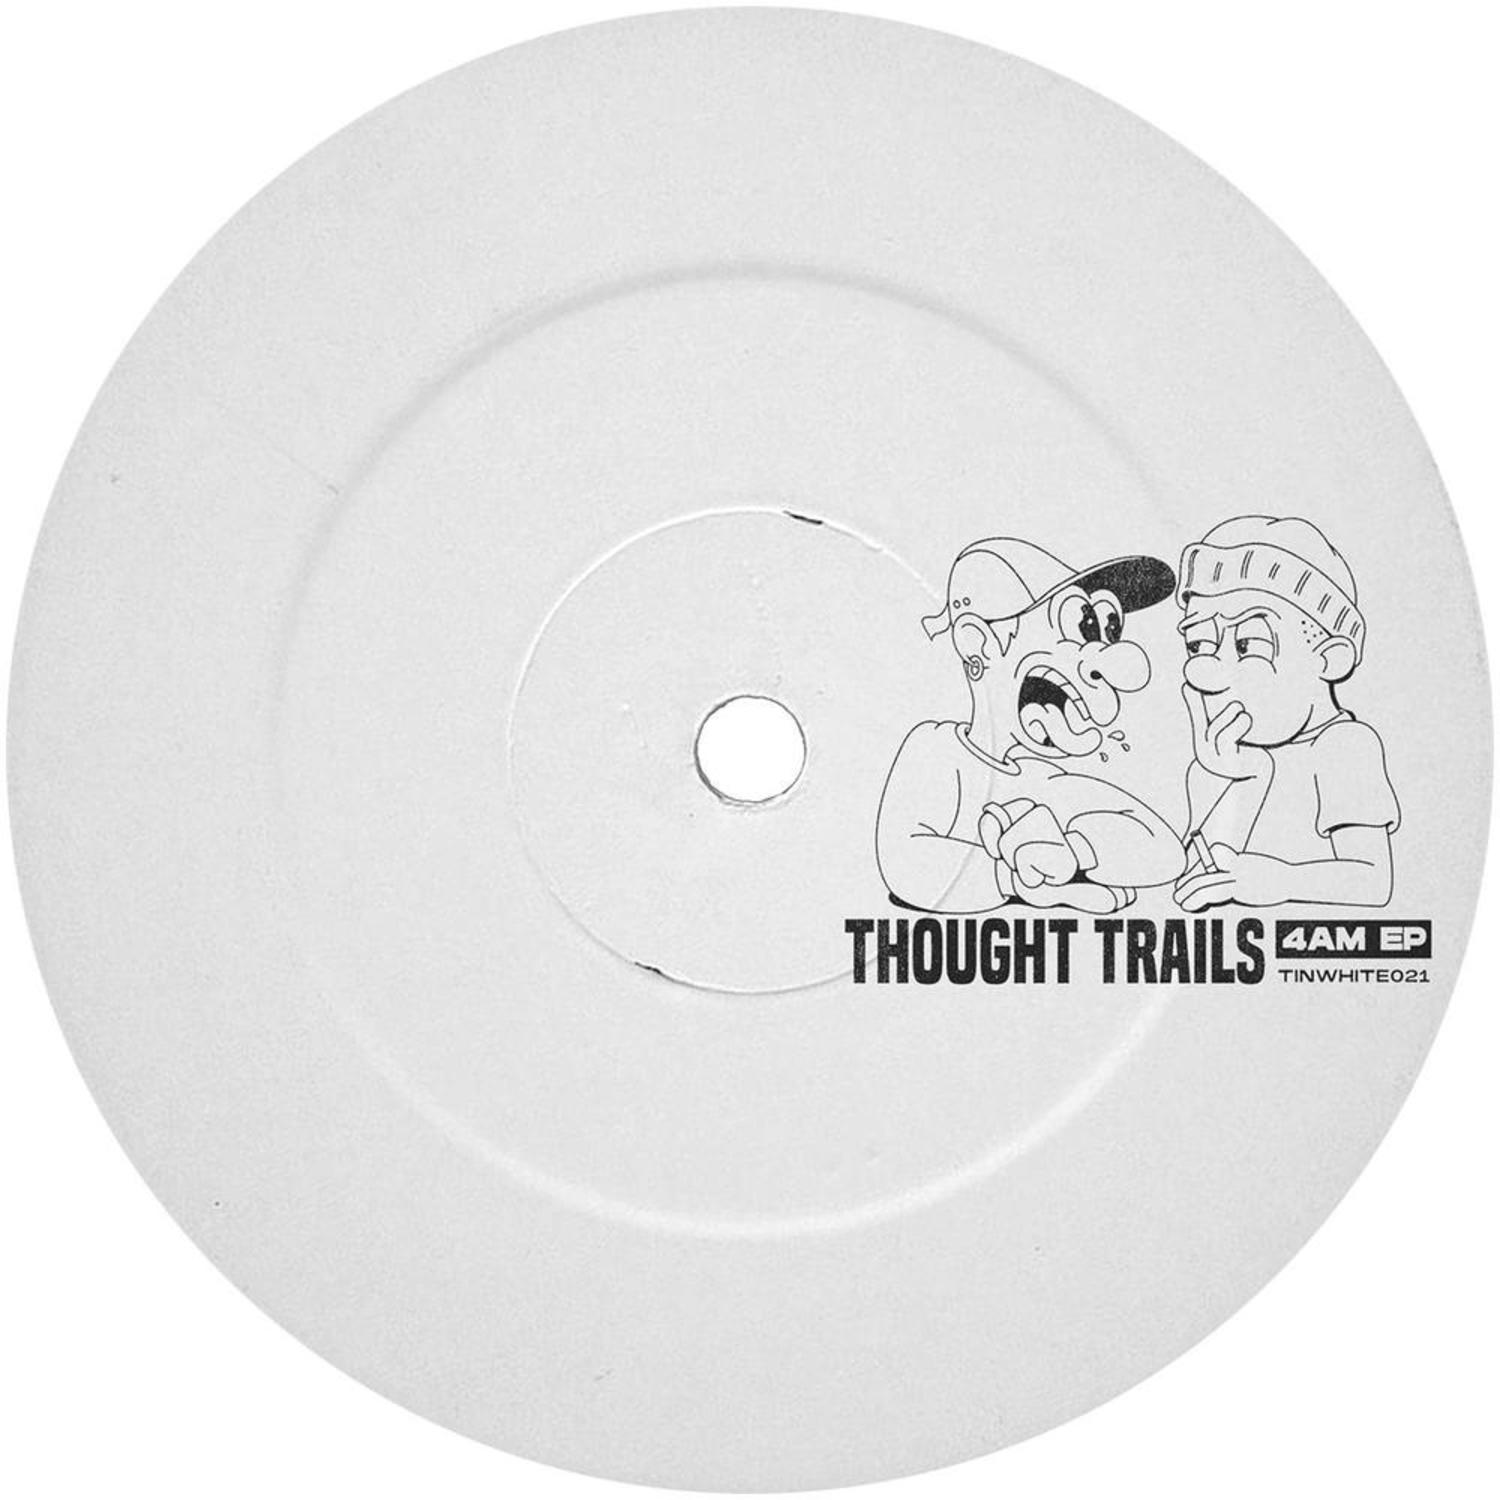 Thought Trails - 4AM EP